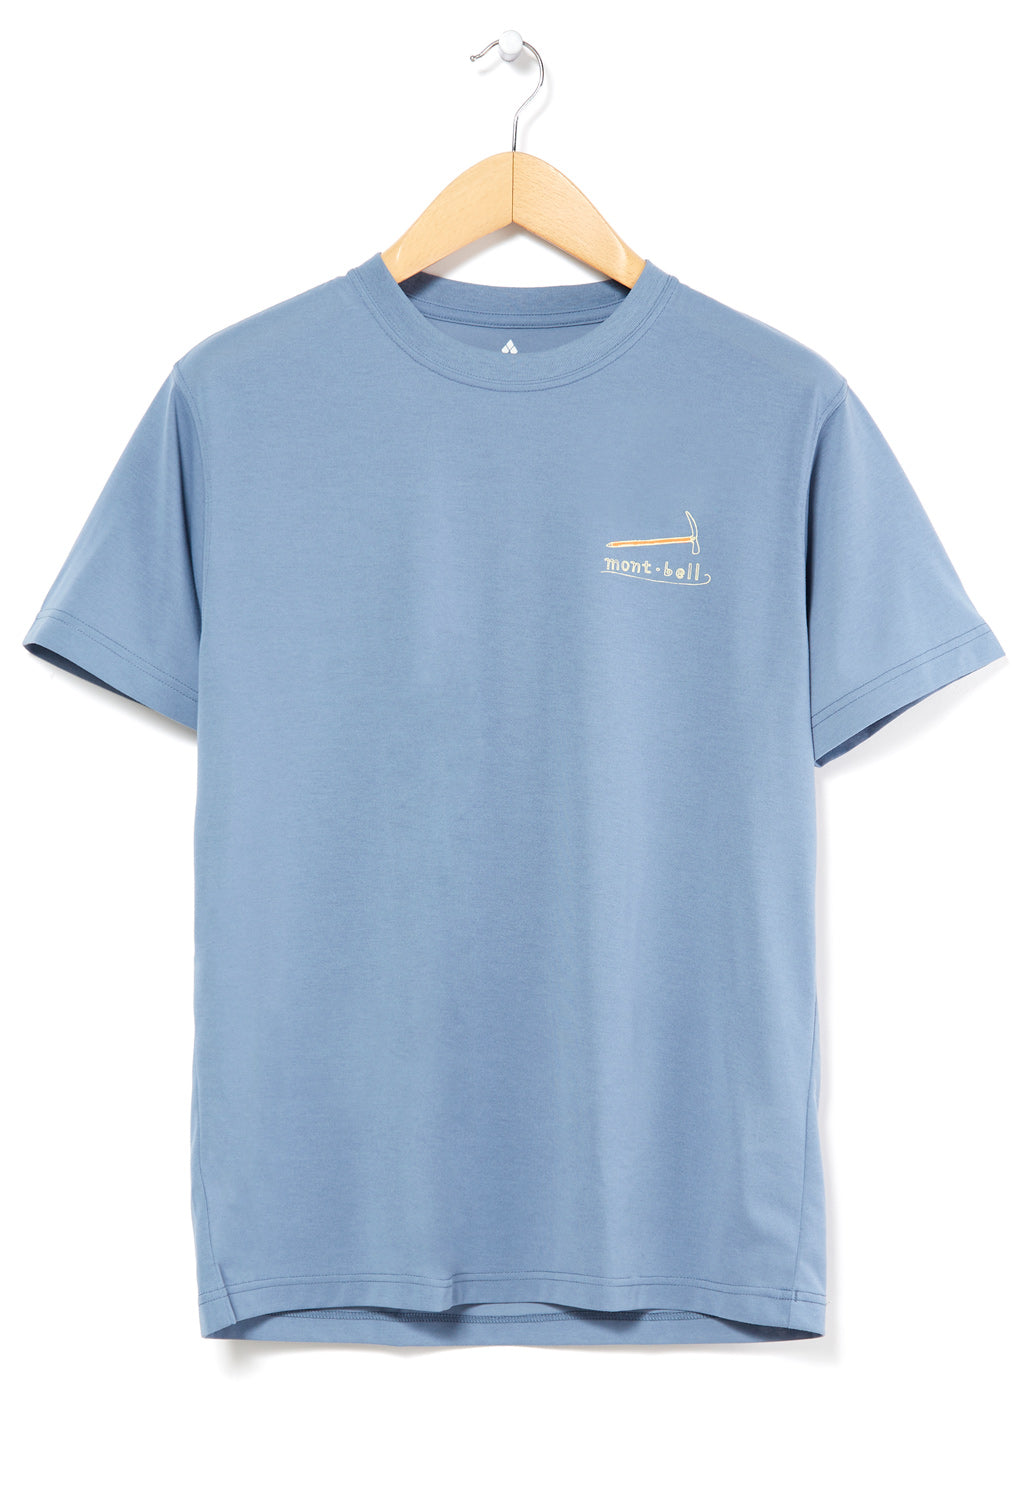 Montbell Wickron Mountain Gear T-Shirt - Blue